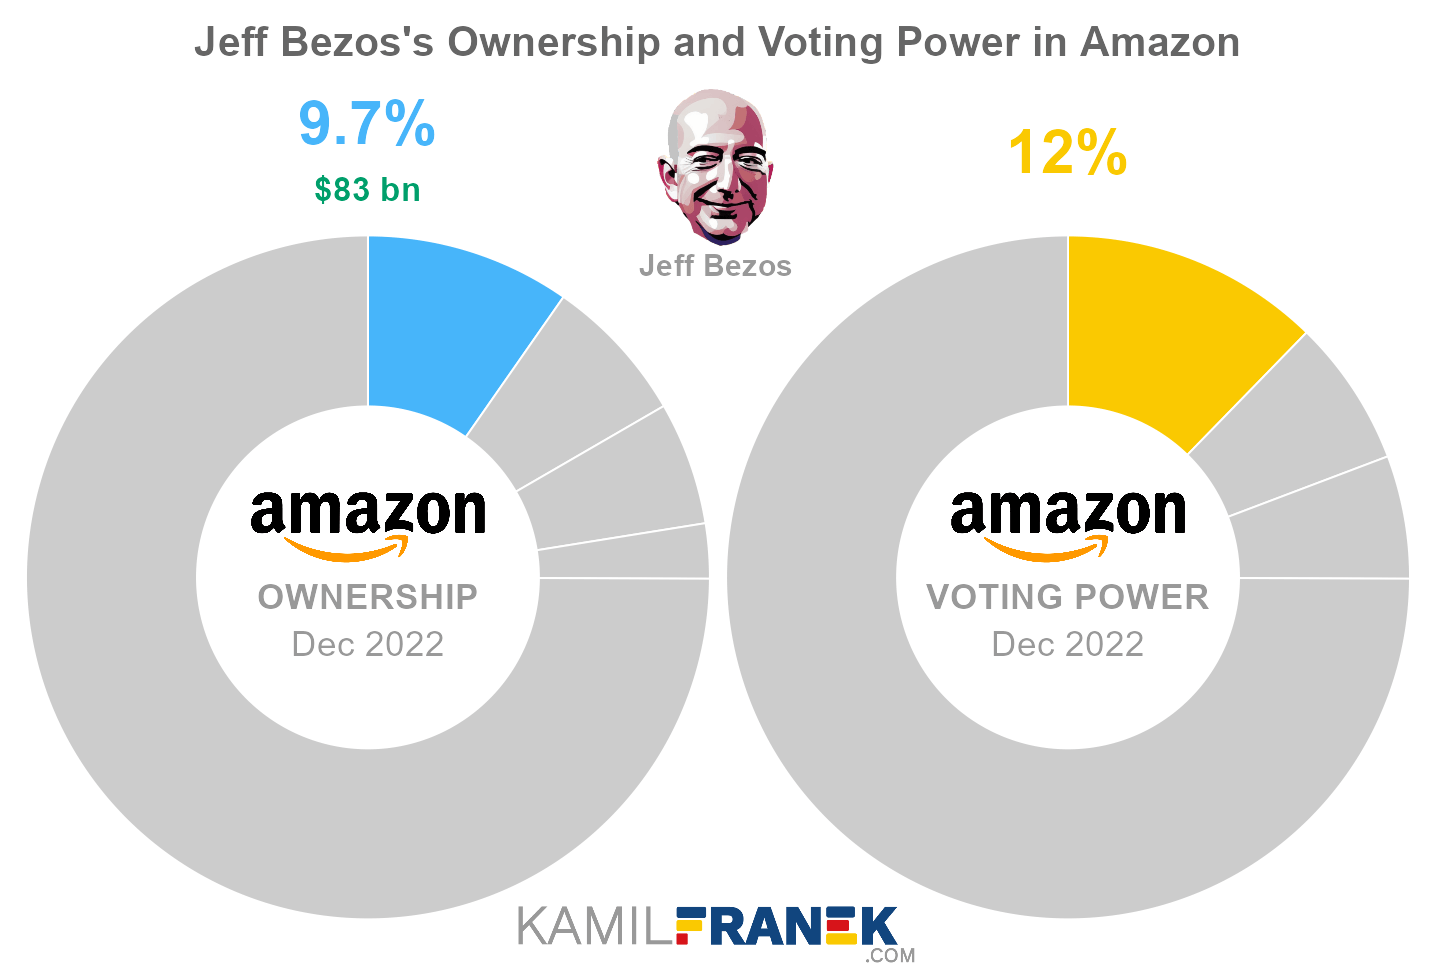 Jeff Bezos's share ownership and voting power in Amazon (chart)